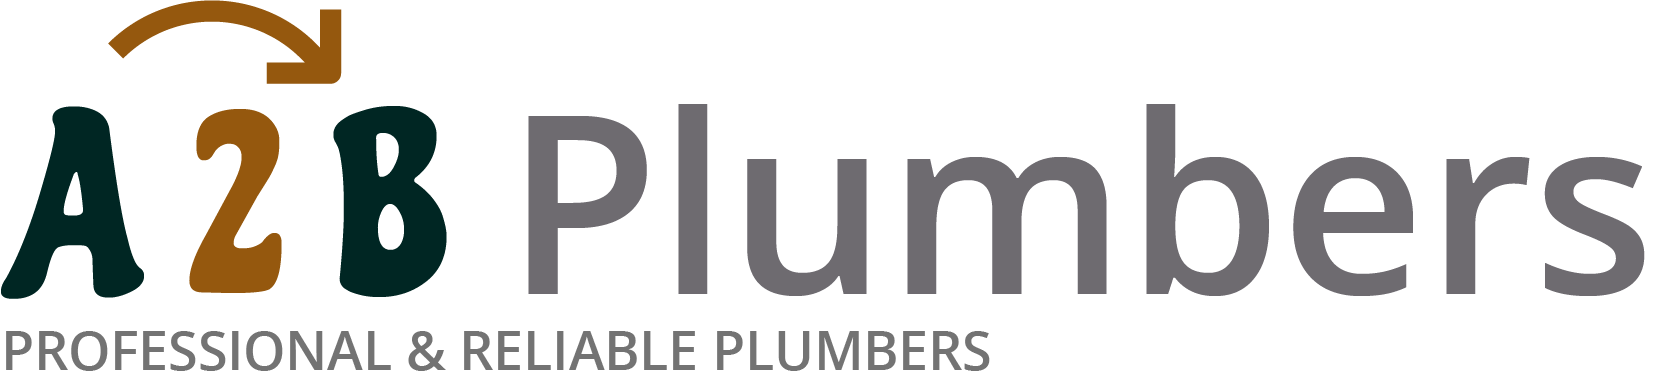 If you need a boiler installed, a radiator repaired or a leaking tap fixed, call us now - we provide services for properties in Downe and the local area.